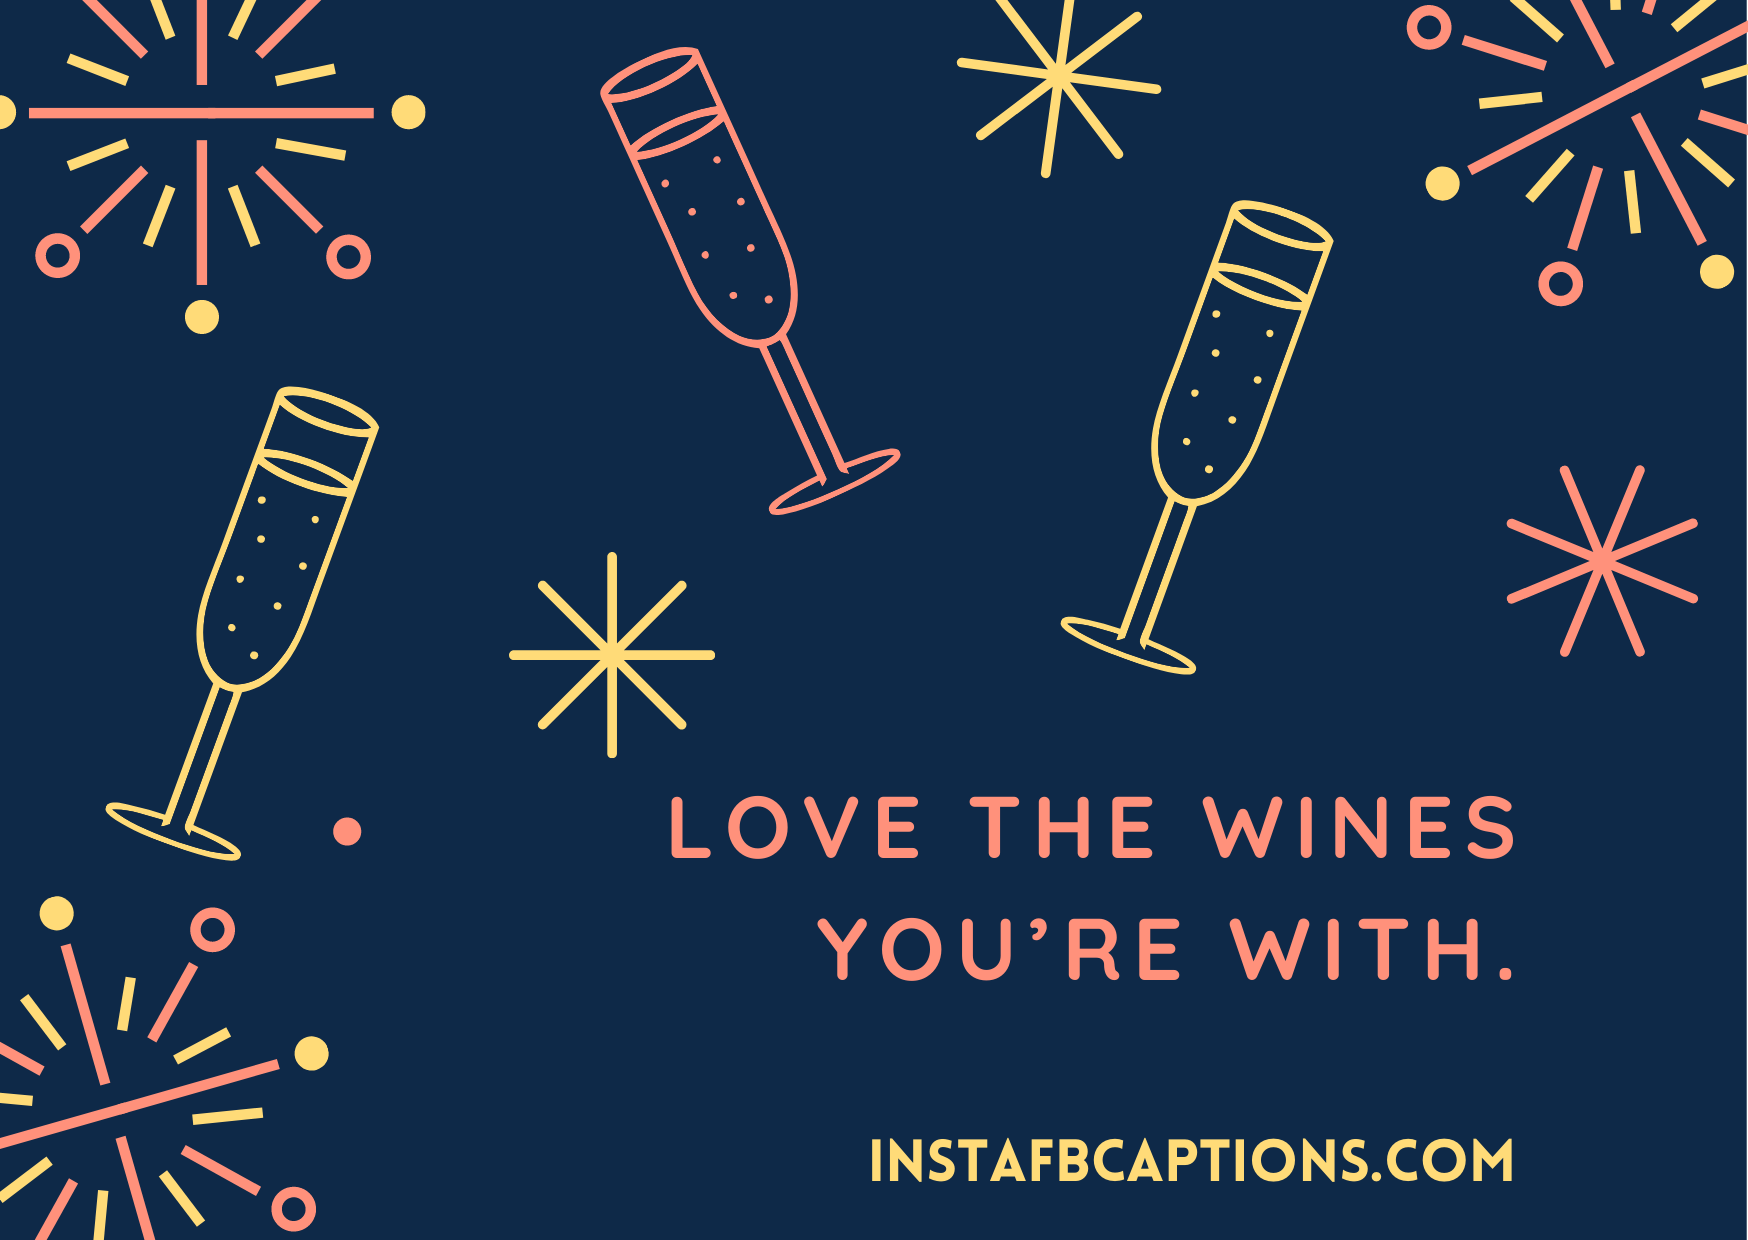 Funny Champagne Captions For Instagram  - Funny Champagne Captions for Instagram - Sparkling CHAMPAGNE Instagram Captions in 2022